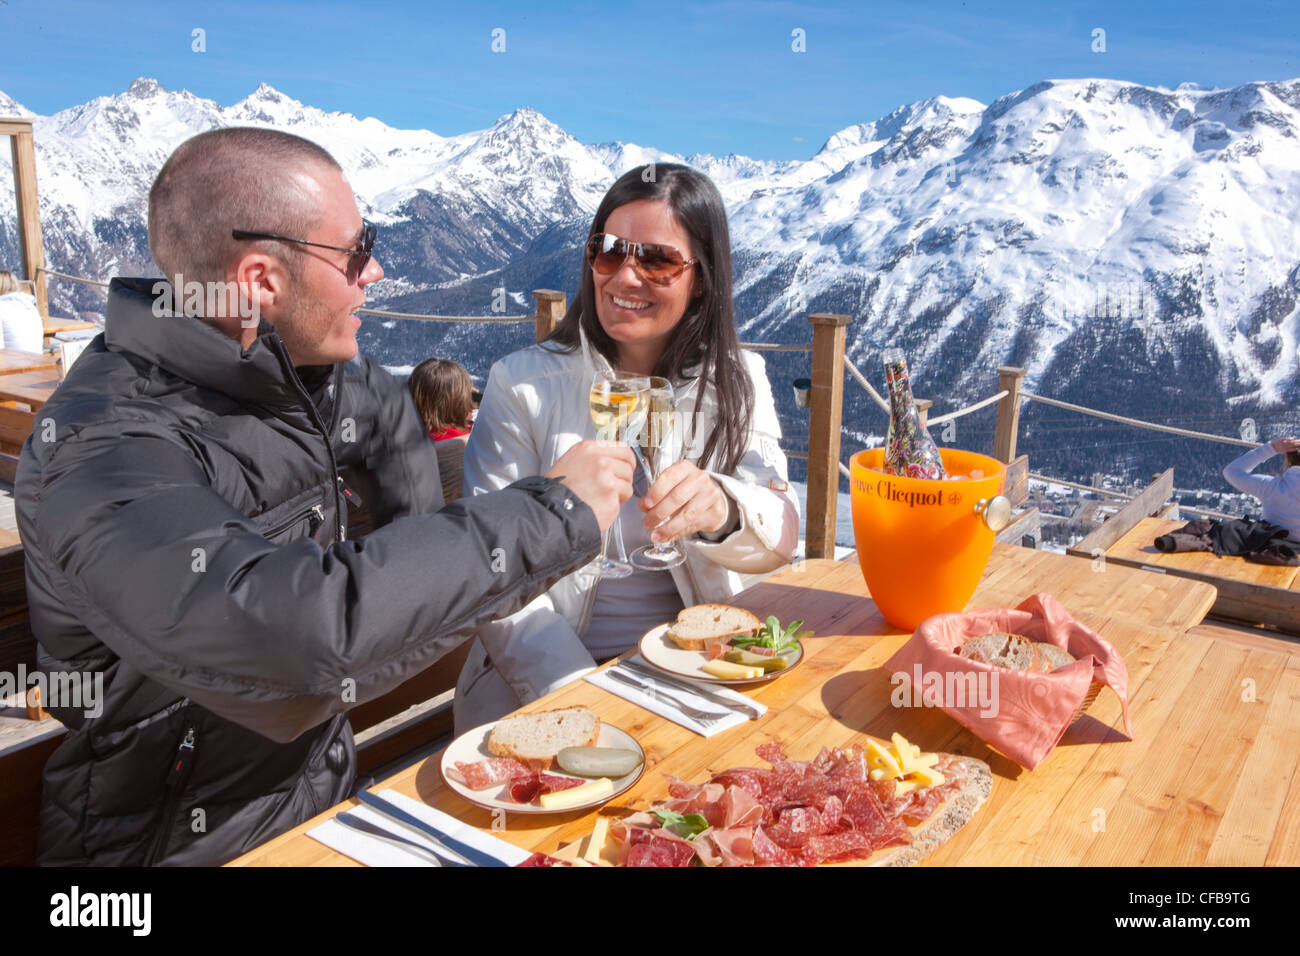 Tourism, holidays, canton, Graubünden, Grisons, Switzerland, Europe,  couple, food, eating, catering, trade, restaurant, hotel, d Stock Photo -  Alamy